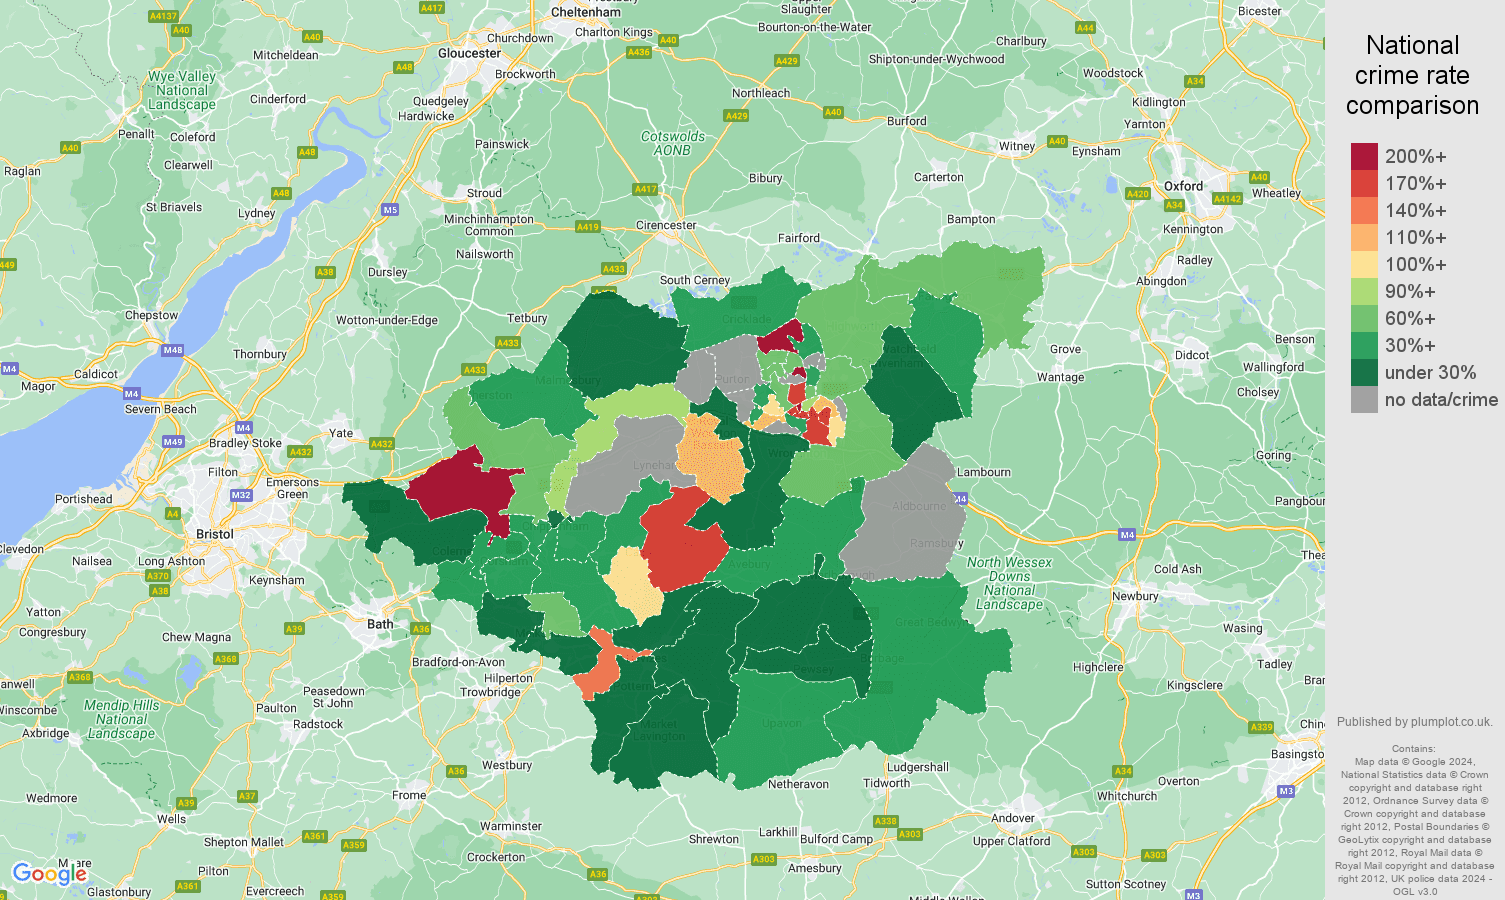 Swindon possession of weapons crime rate comparison map